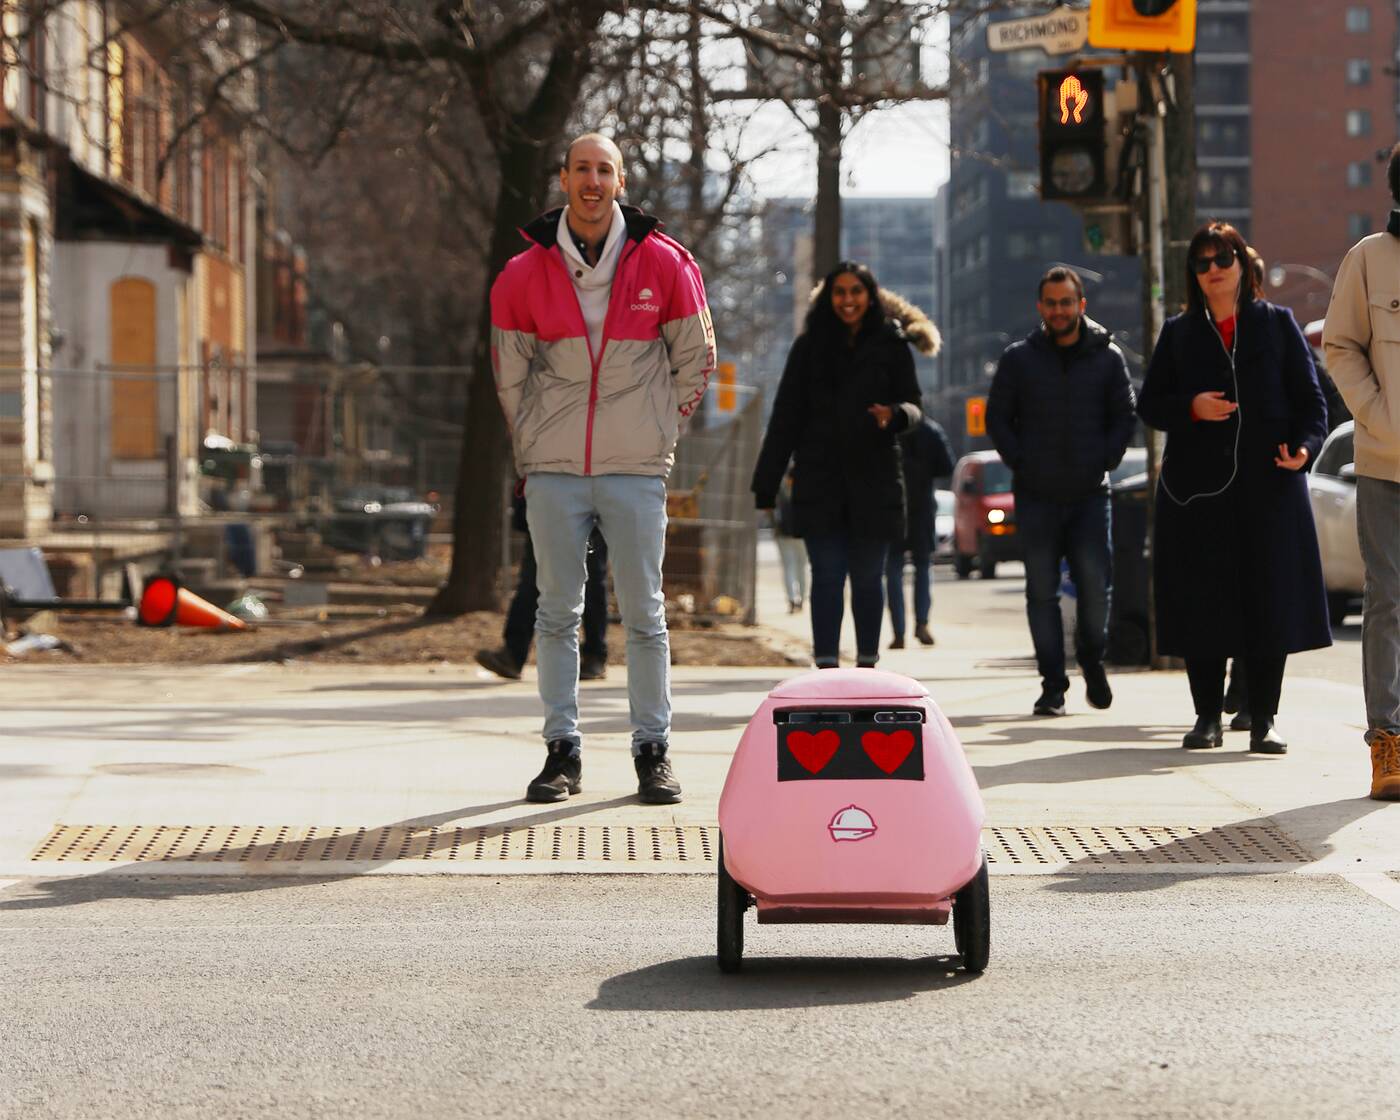 Meet Geoffrey, the Pink Robot with Heart-Shaped Eyes that Delivers Coffee  in Charlotte, News